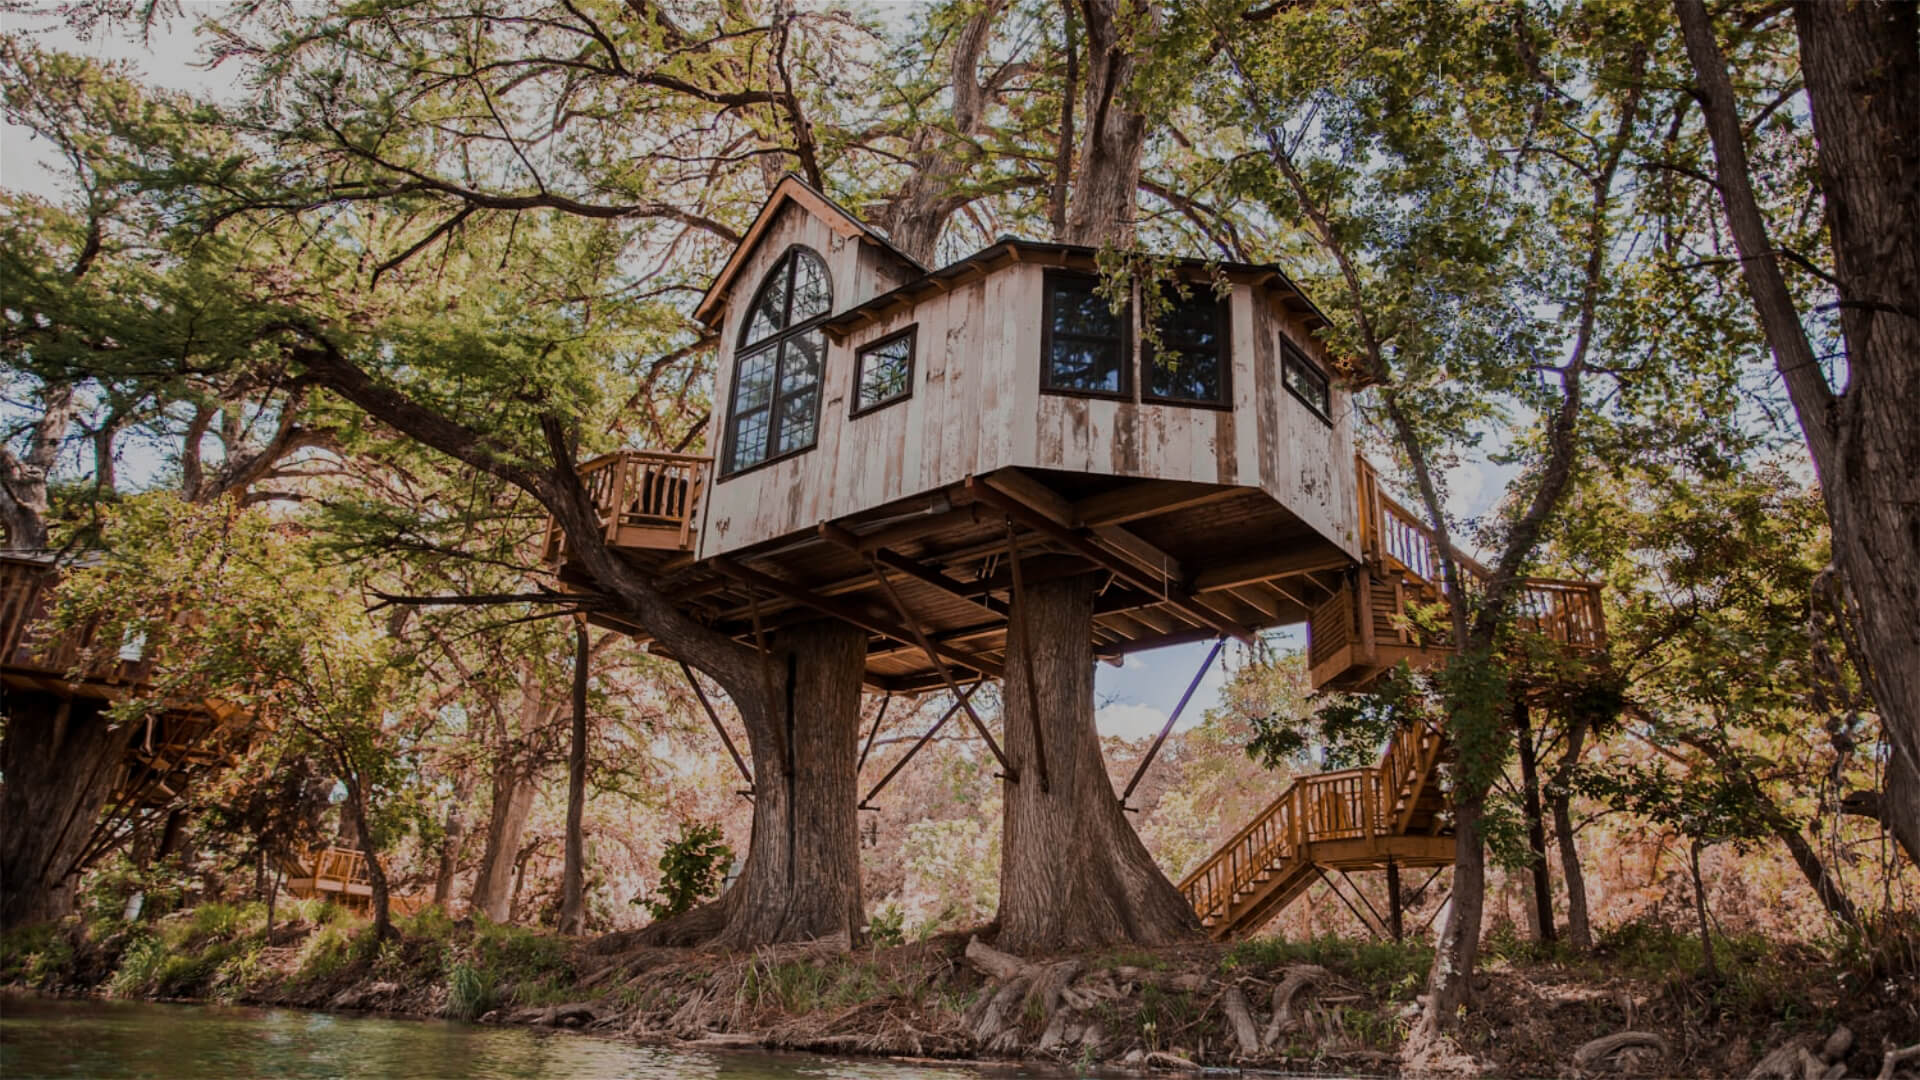 Company insurance is intended to safeguard the financial assets of a business owner and is a crucial investment for a bespoke treehouse business.